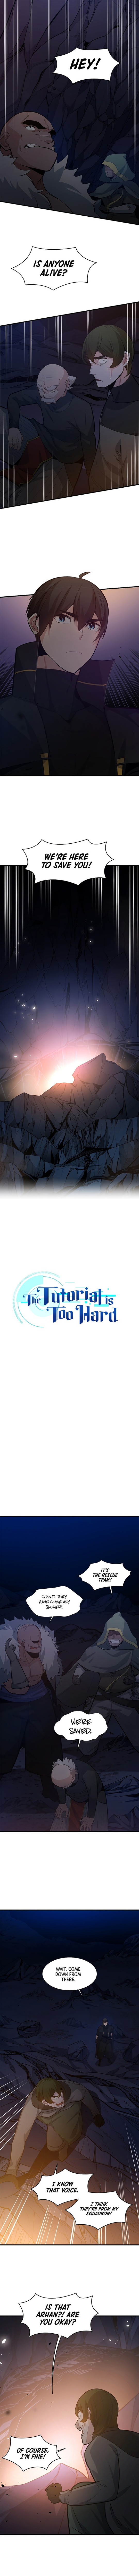 the_tutorial_is_too_hard_103_1